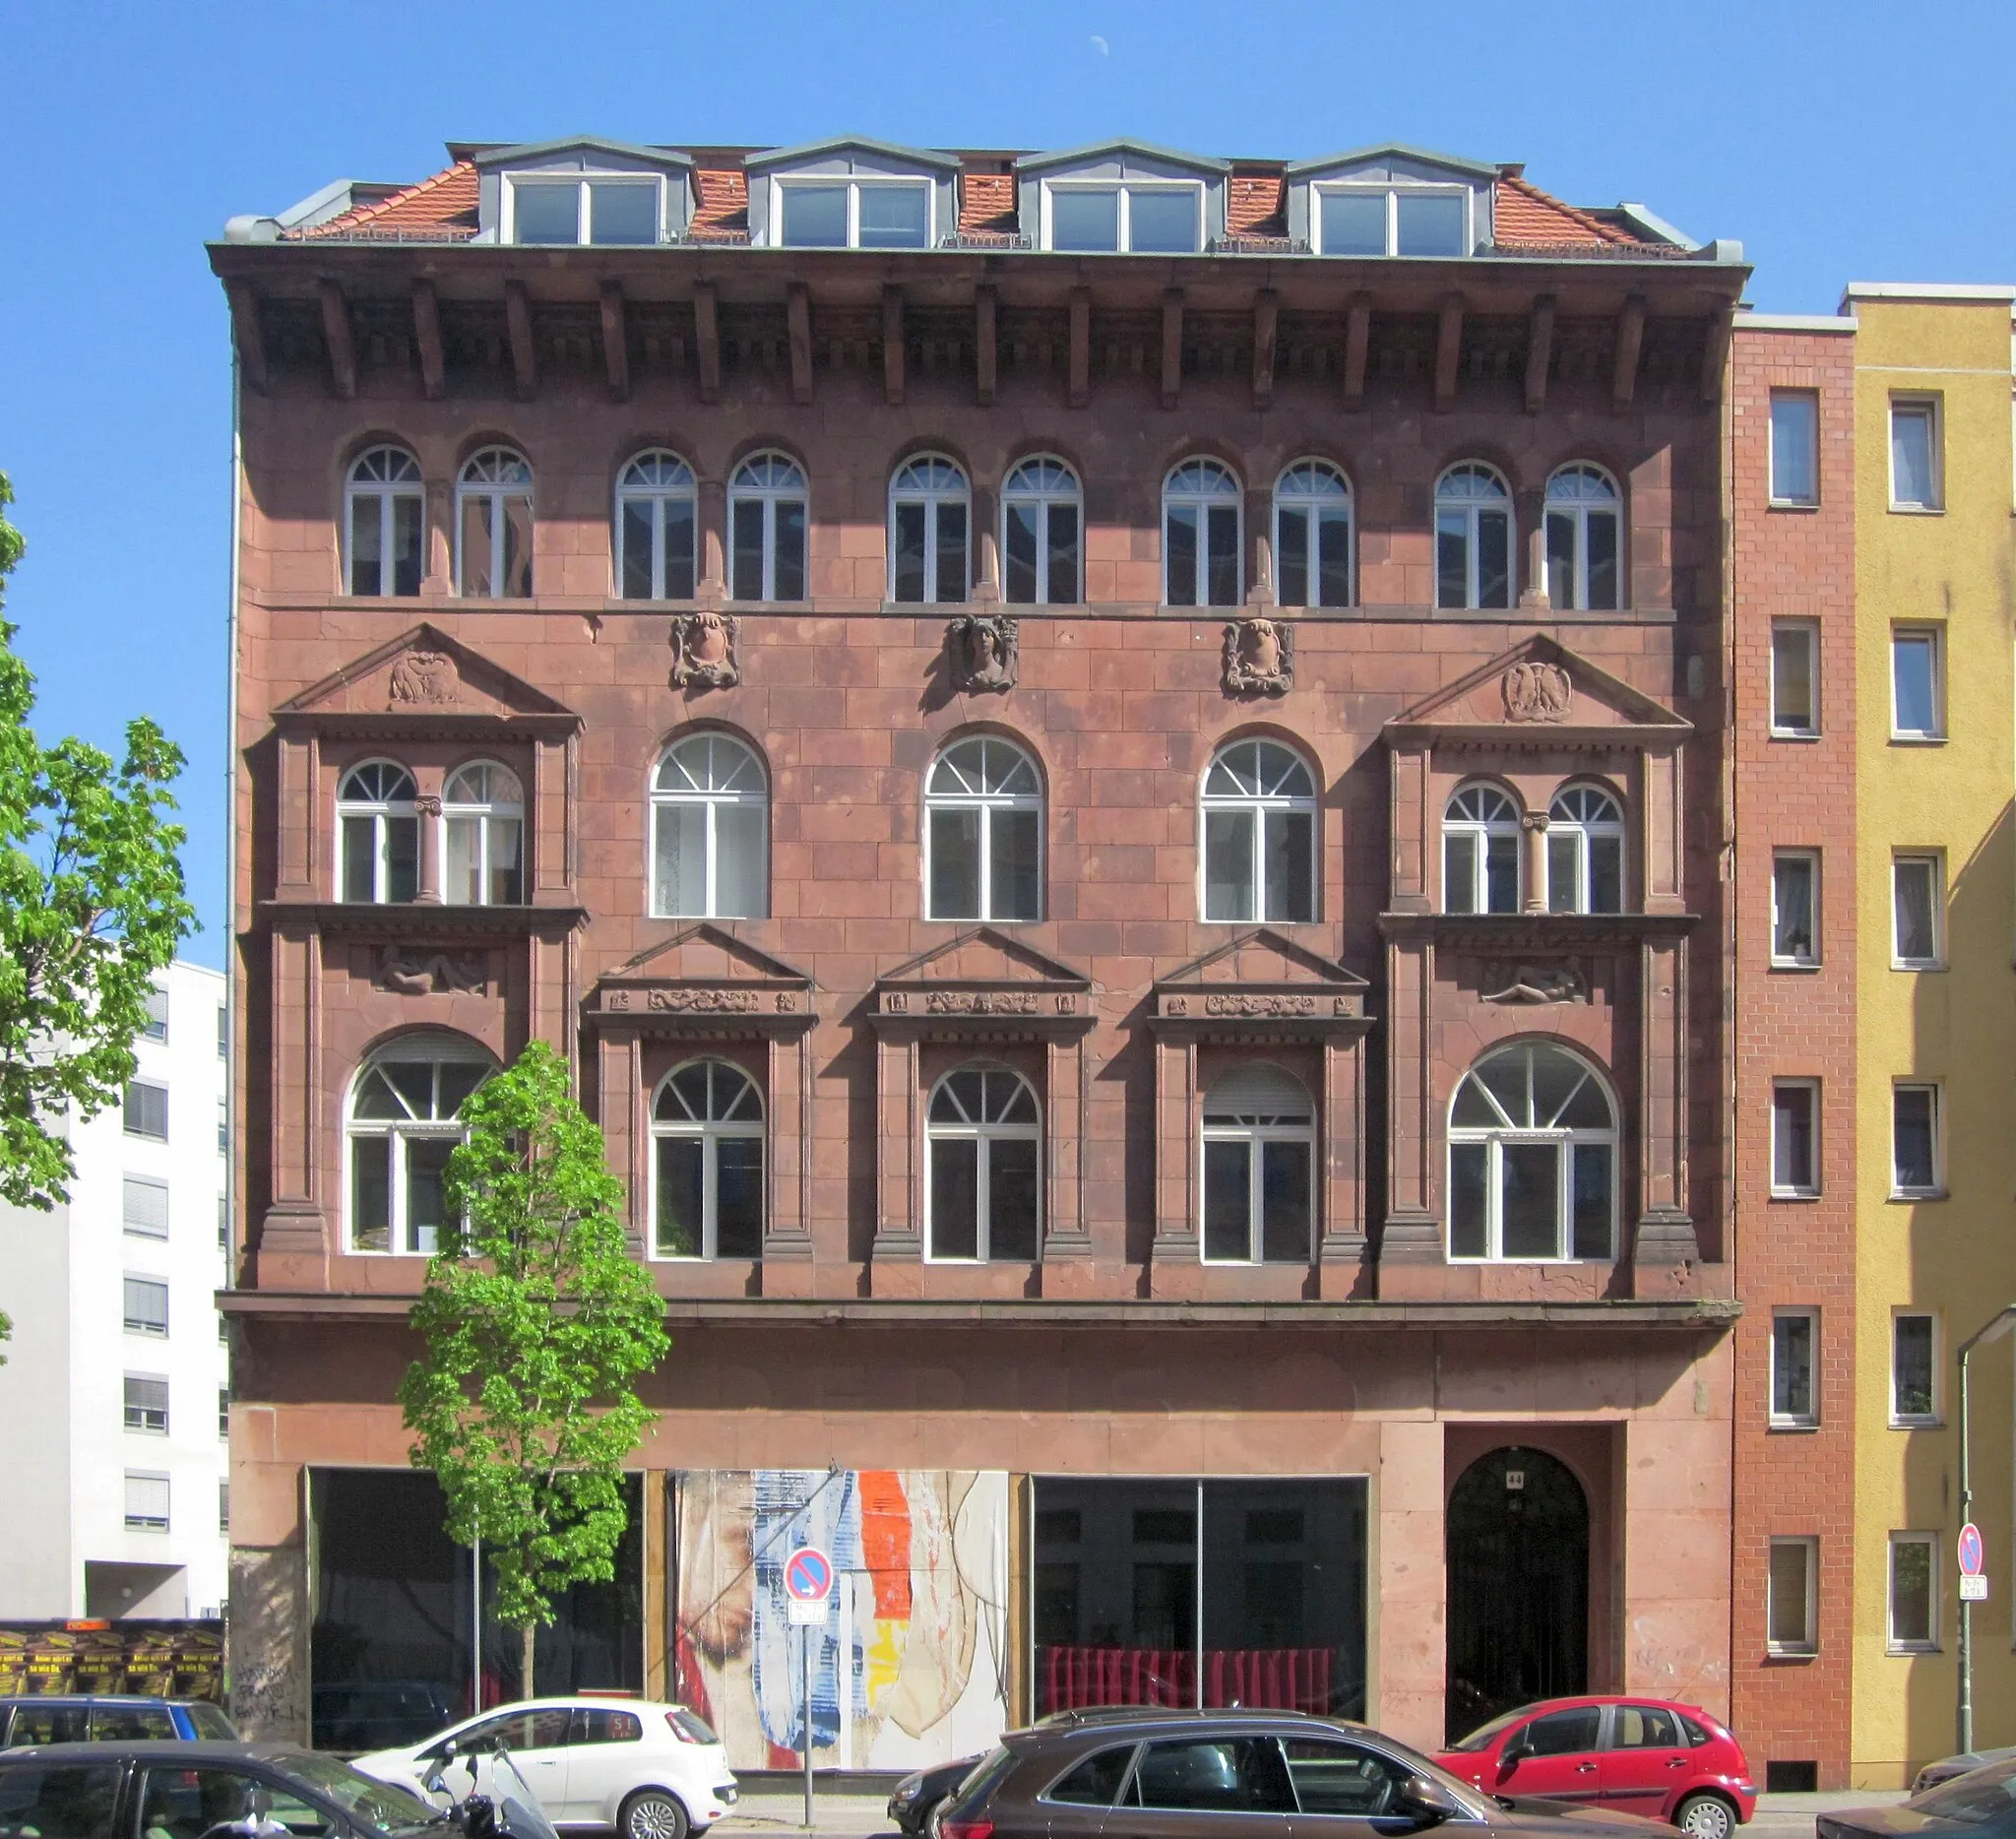 Photo showing: The Künstlerhaus (Artists' House) at Köthener Straße No. 44 in Berlin-Kreuzberg. It was constructed in 1911 to a design by Paul Zimmerreimer as bank building for Deutscher Creditverein. It is now used by a number of cultural institutions. The building has been designated as a cultural heritage monument.